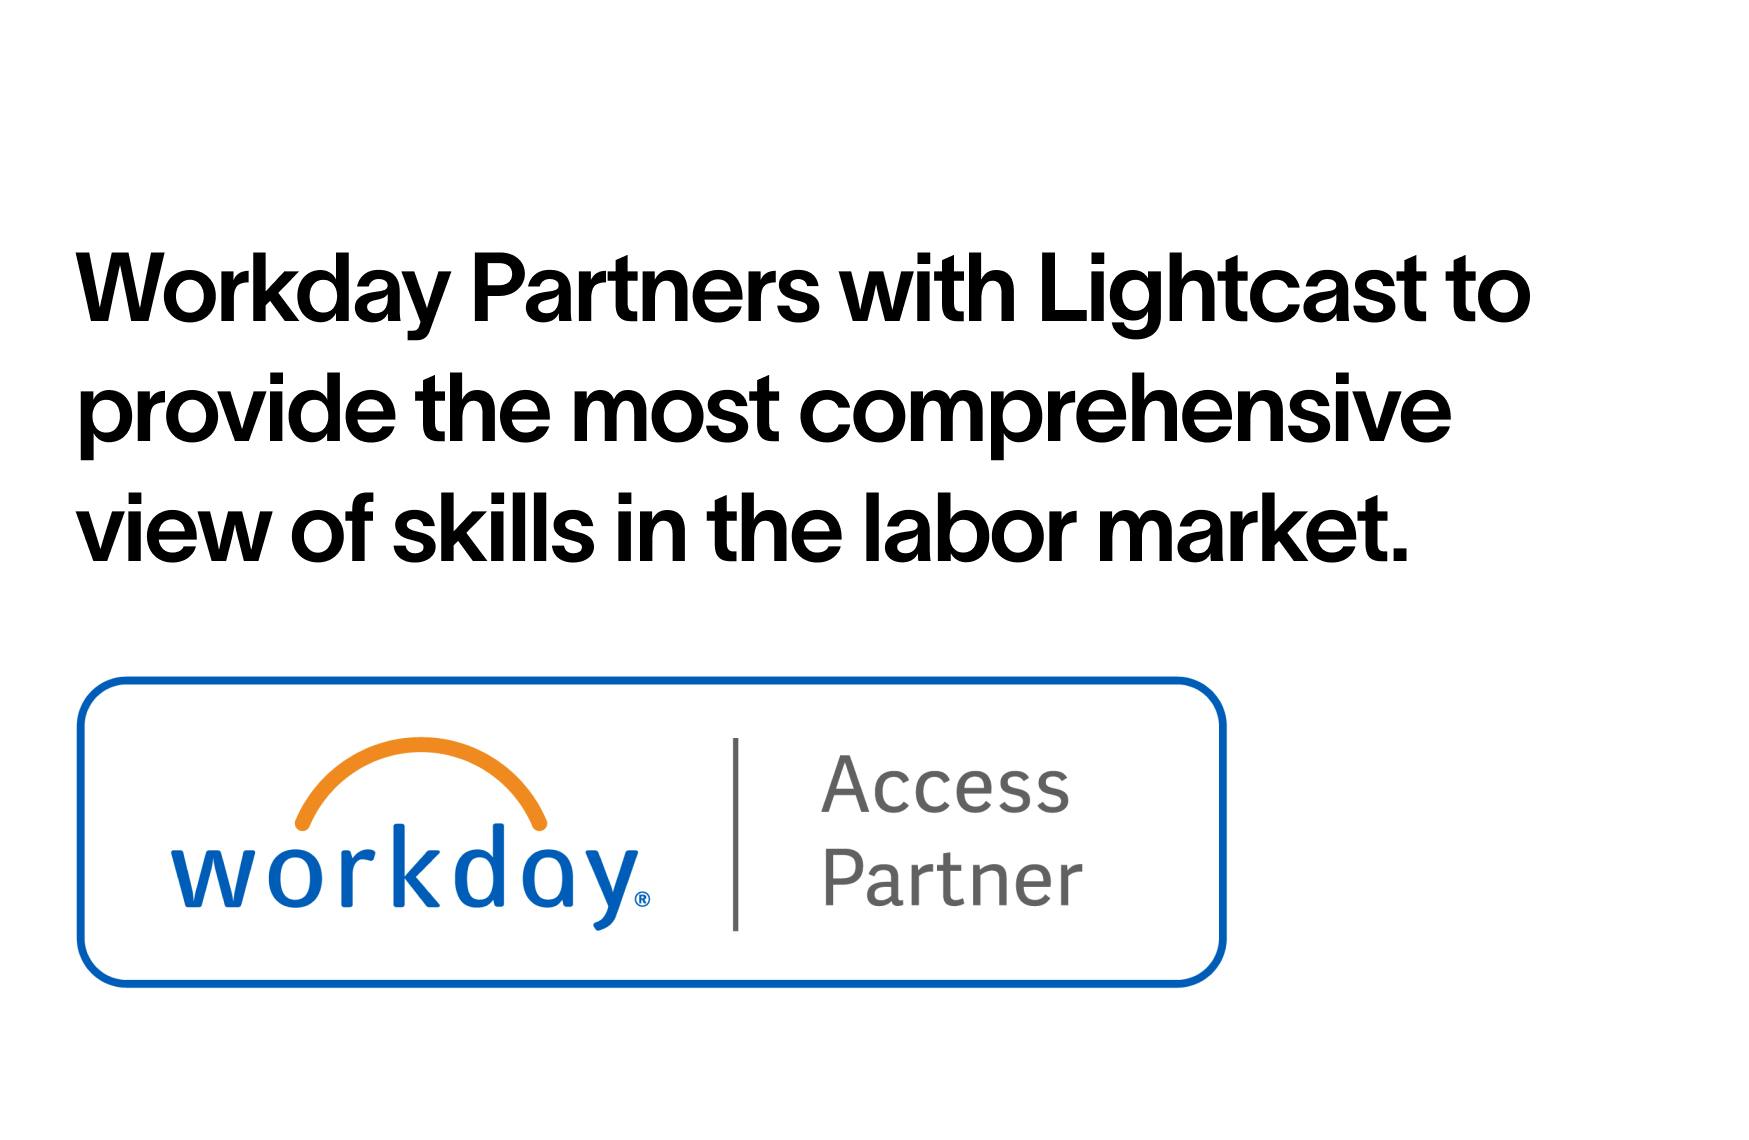 workday partners with Lightcast